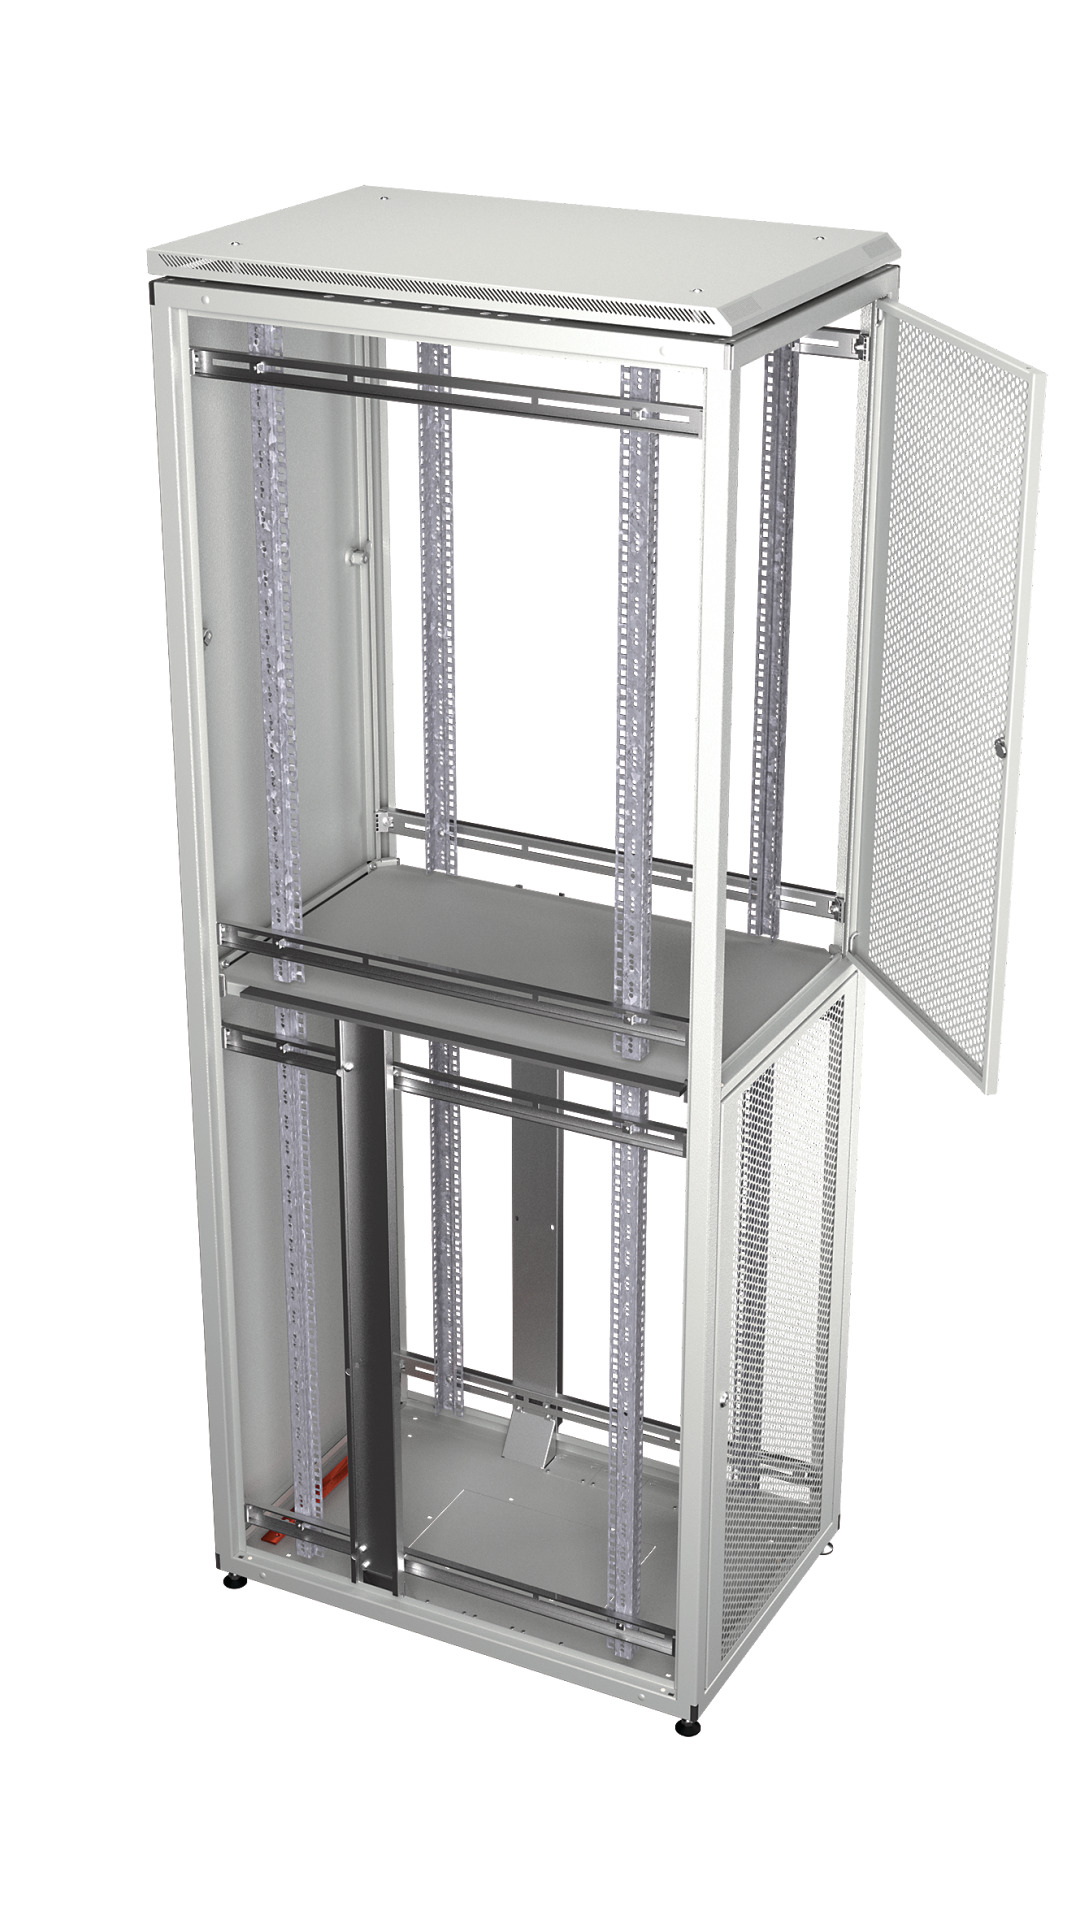 Co-Location Rack PRO, 4 x 9HE, 600x1200 mm, F+R 1-tlg. perforiert, RAL9005